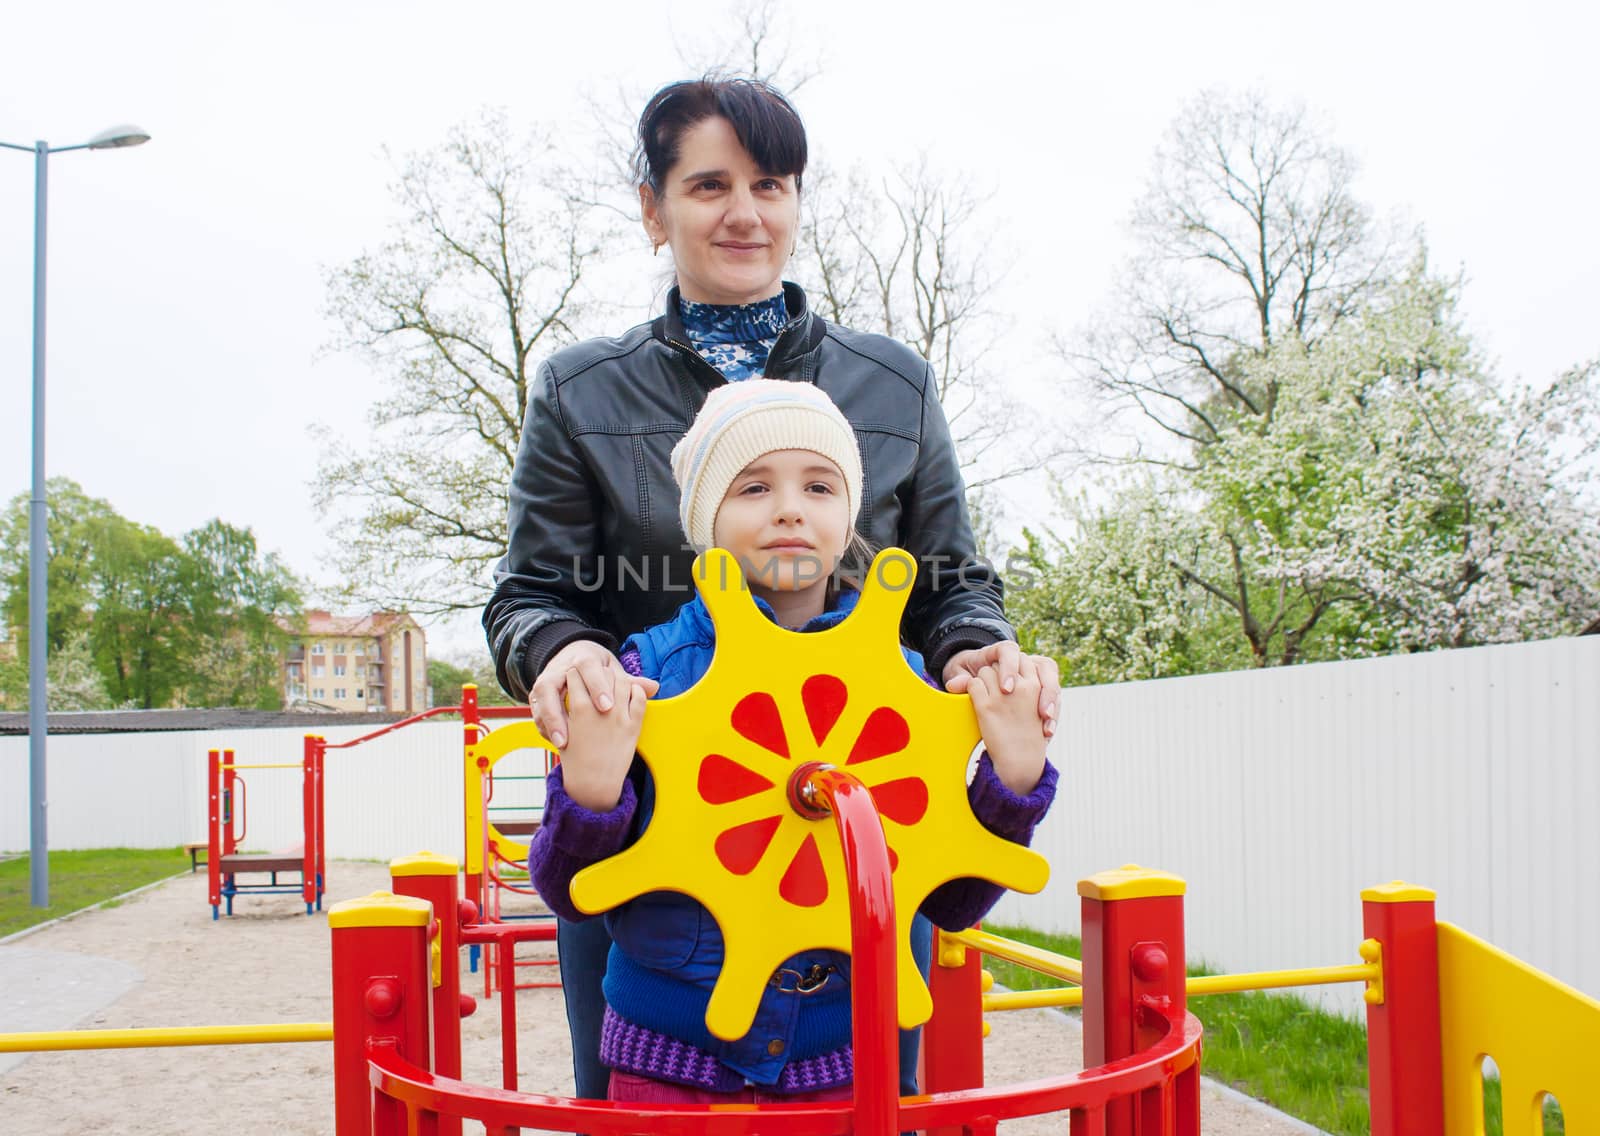 mom plays with her daughter at the playground on a toy ship on spring day